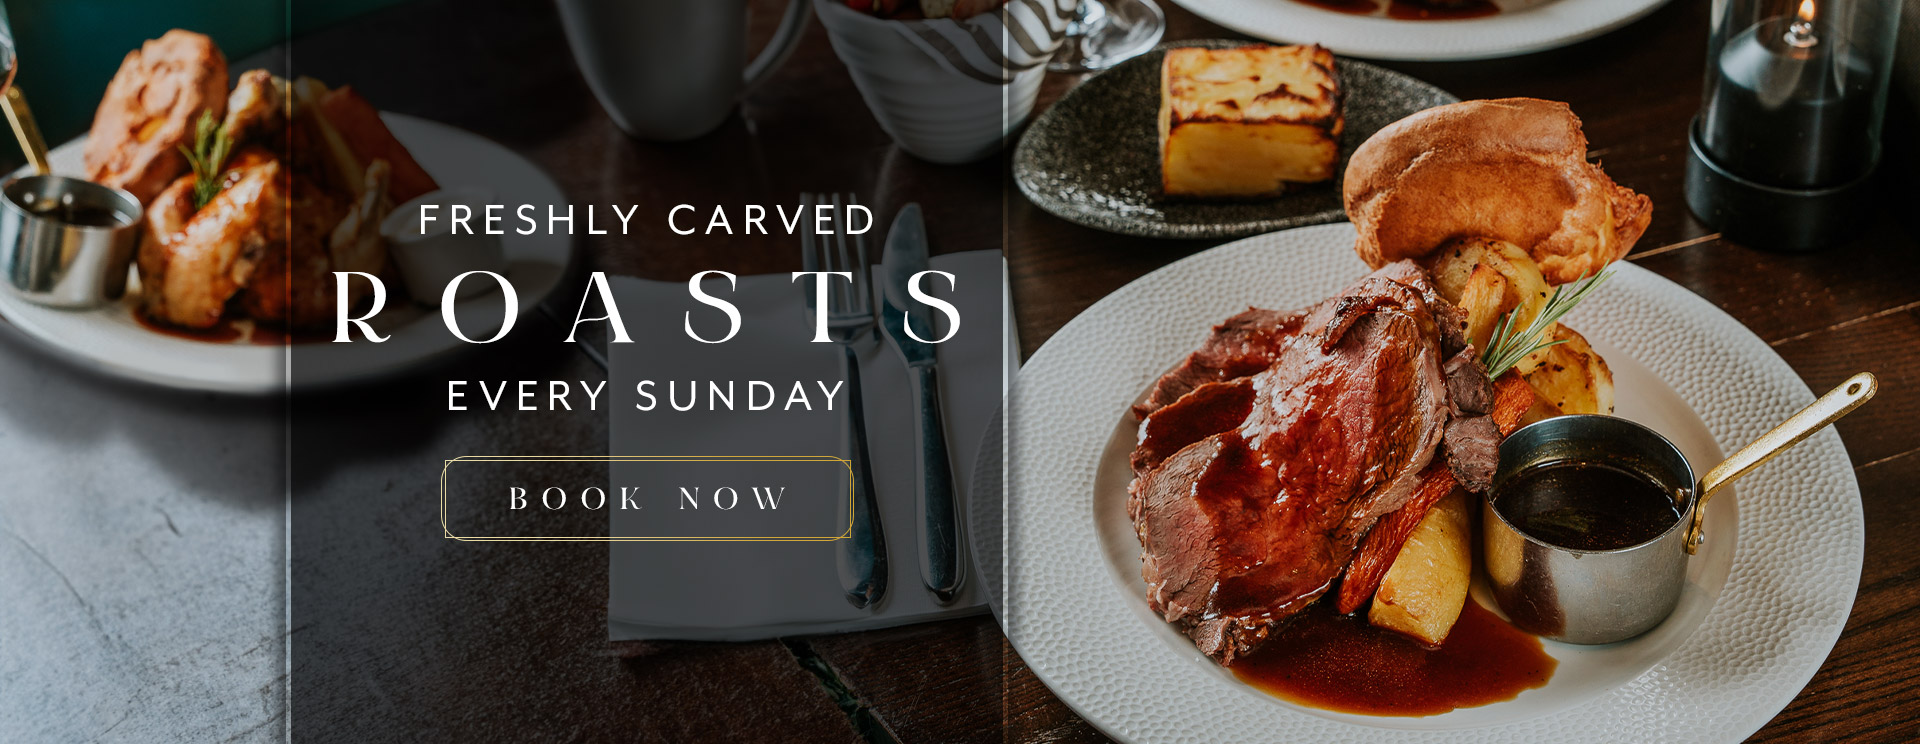 Sunday Lunch at The Queen & Castle